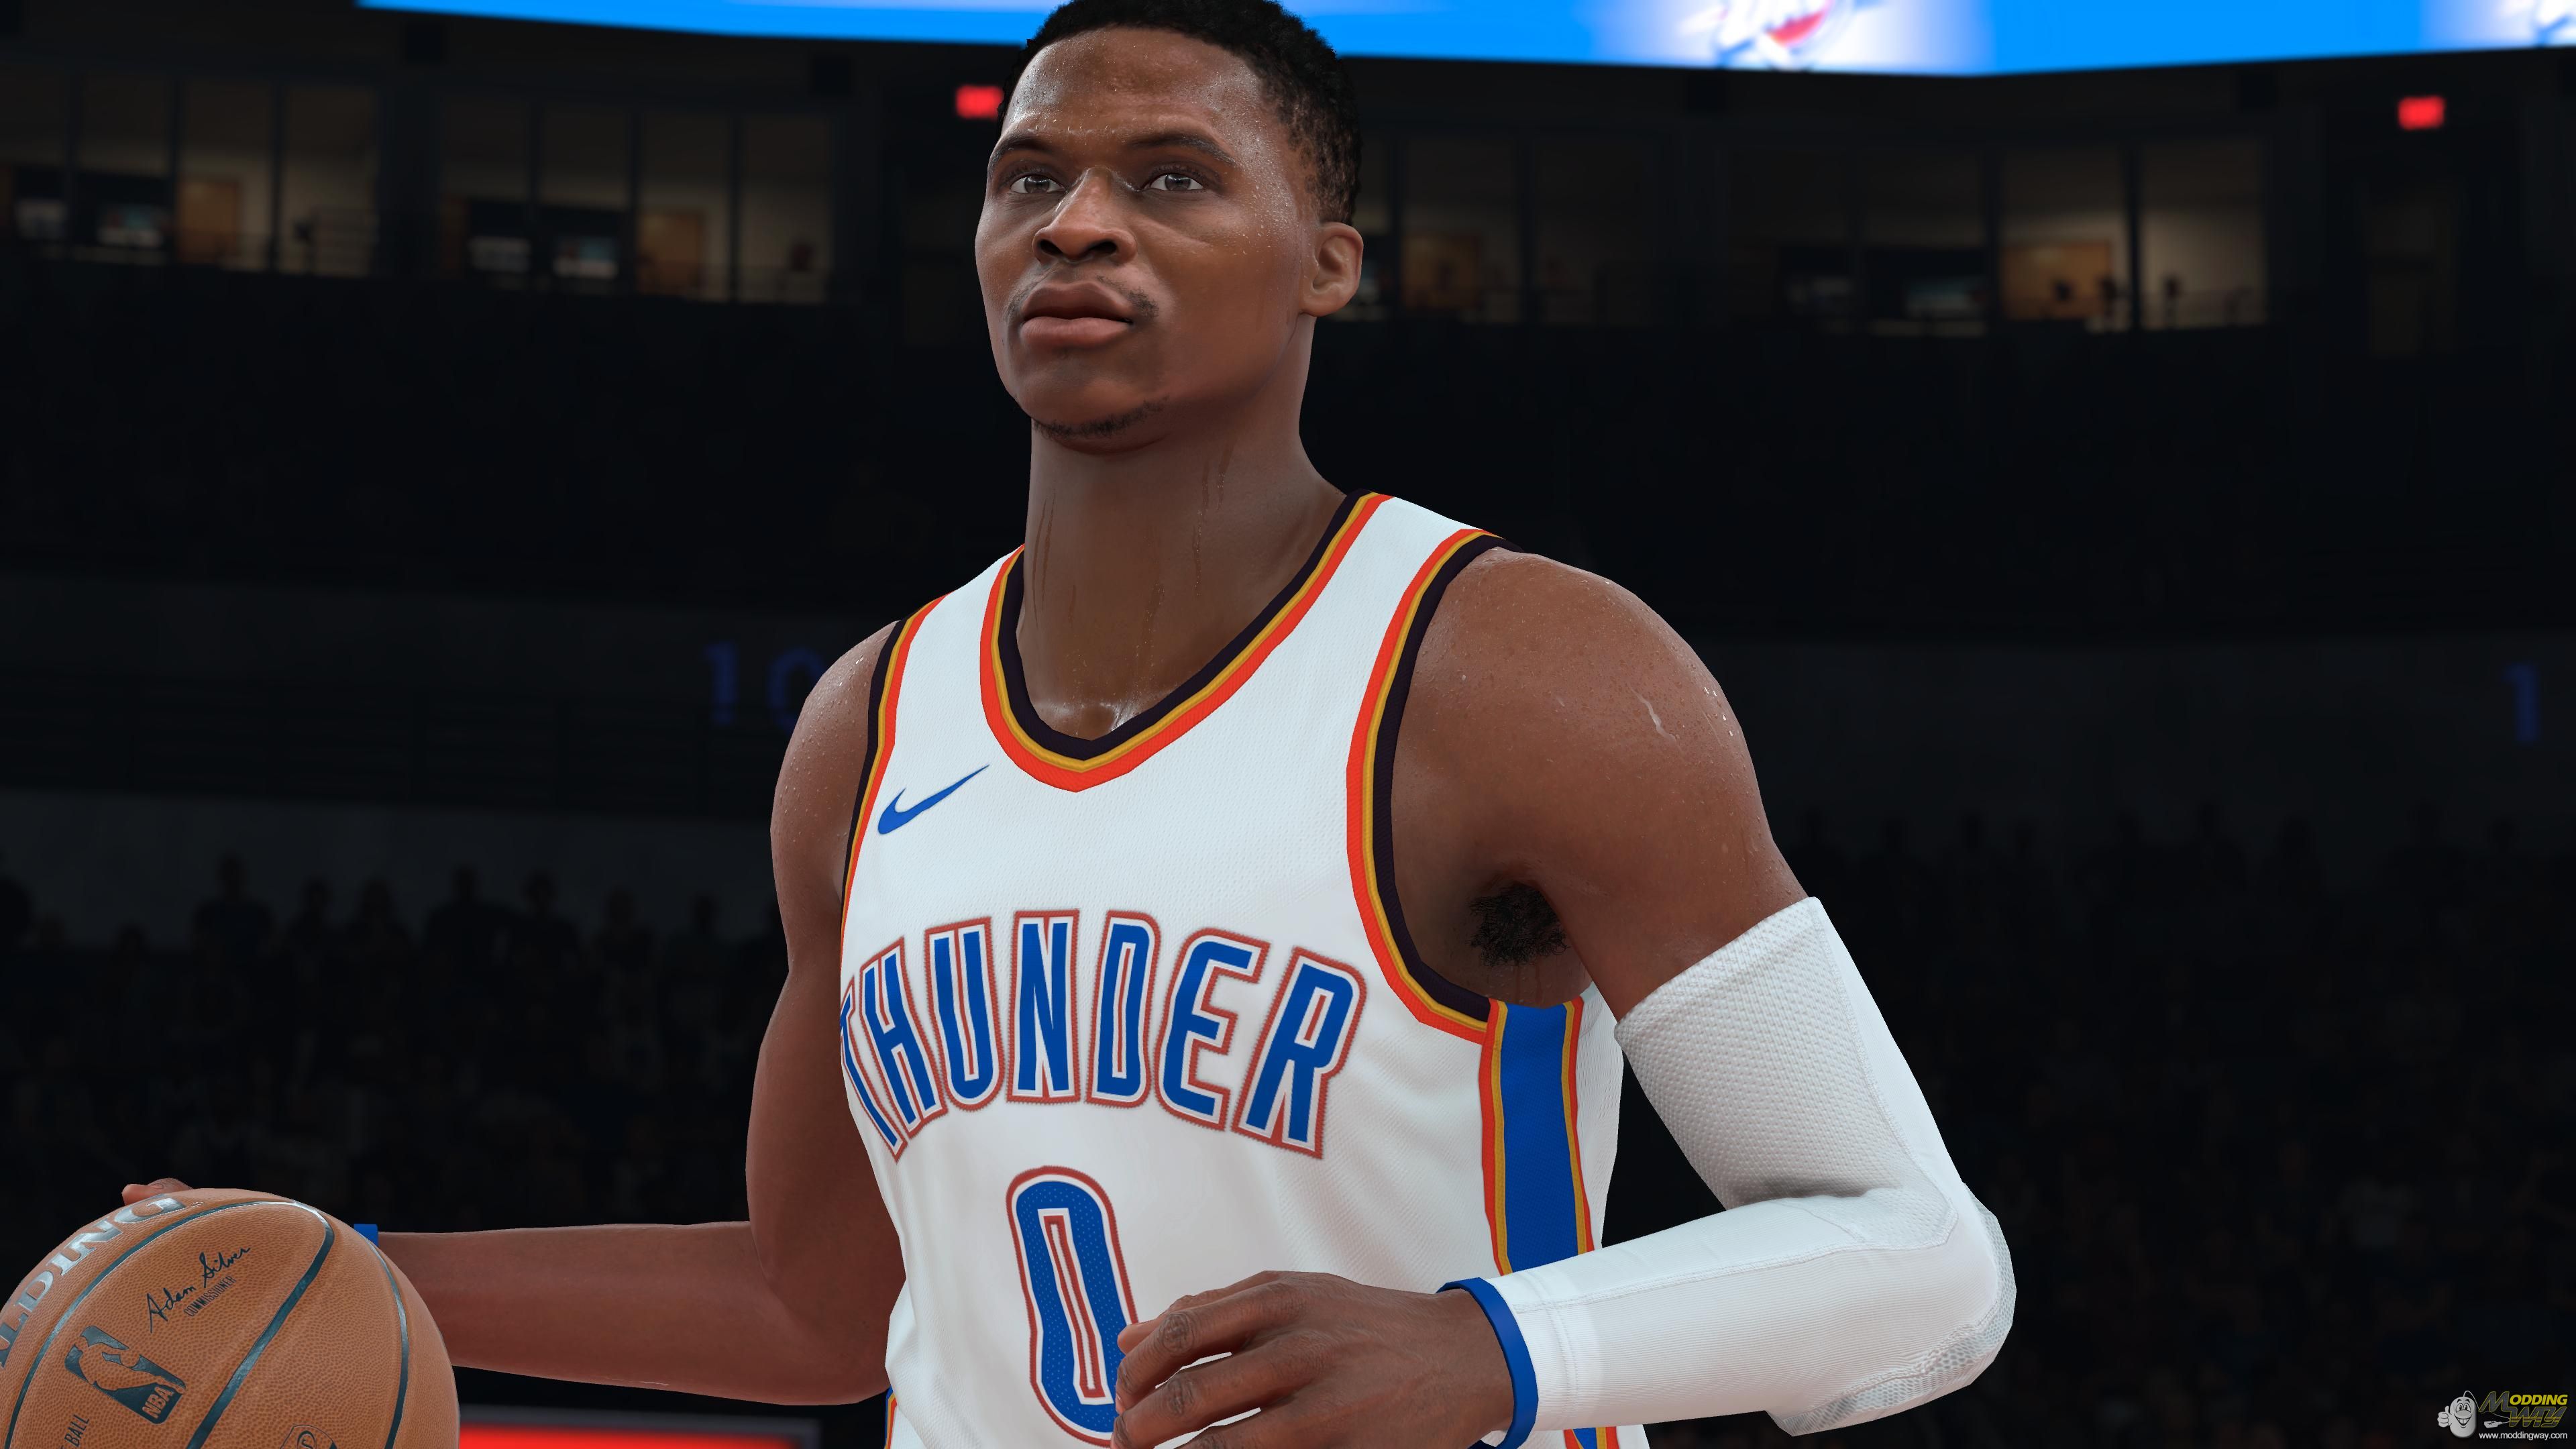 Nba 2k18 russell westbrook overall